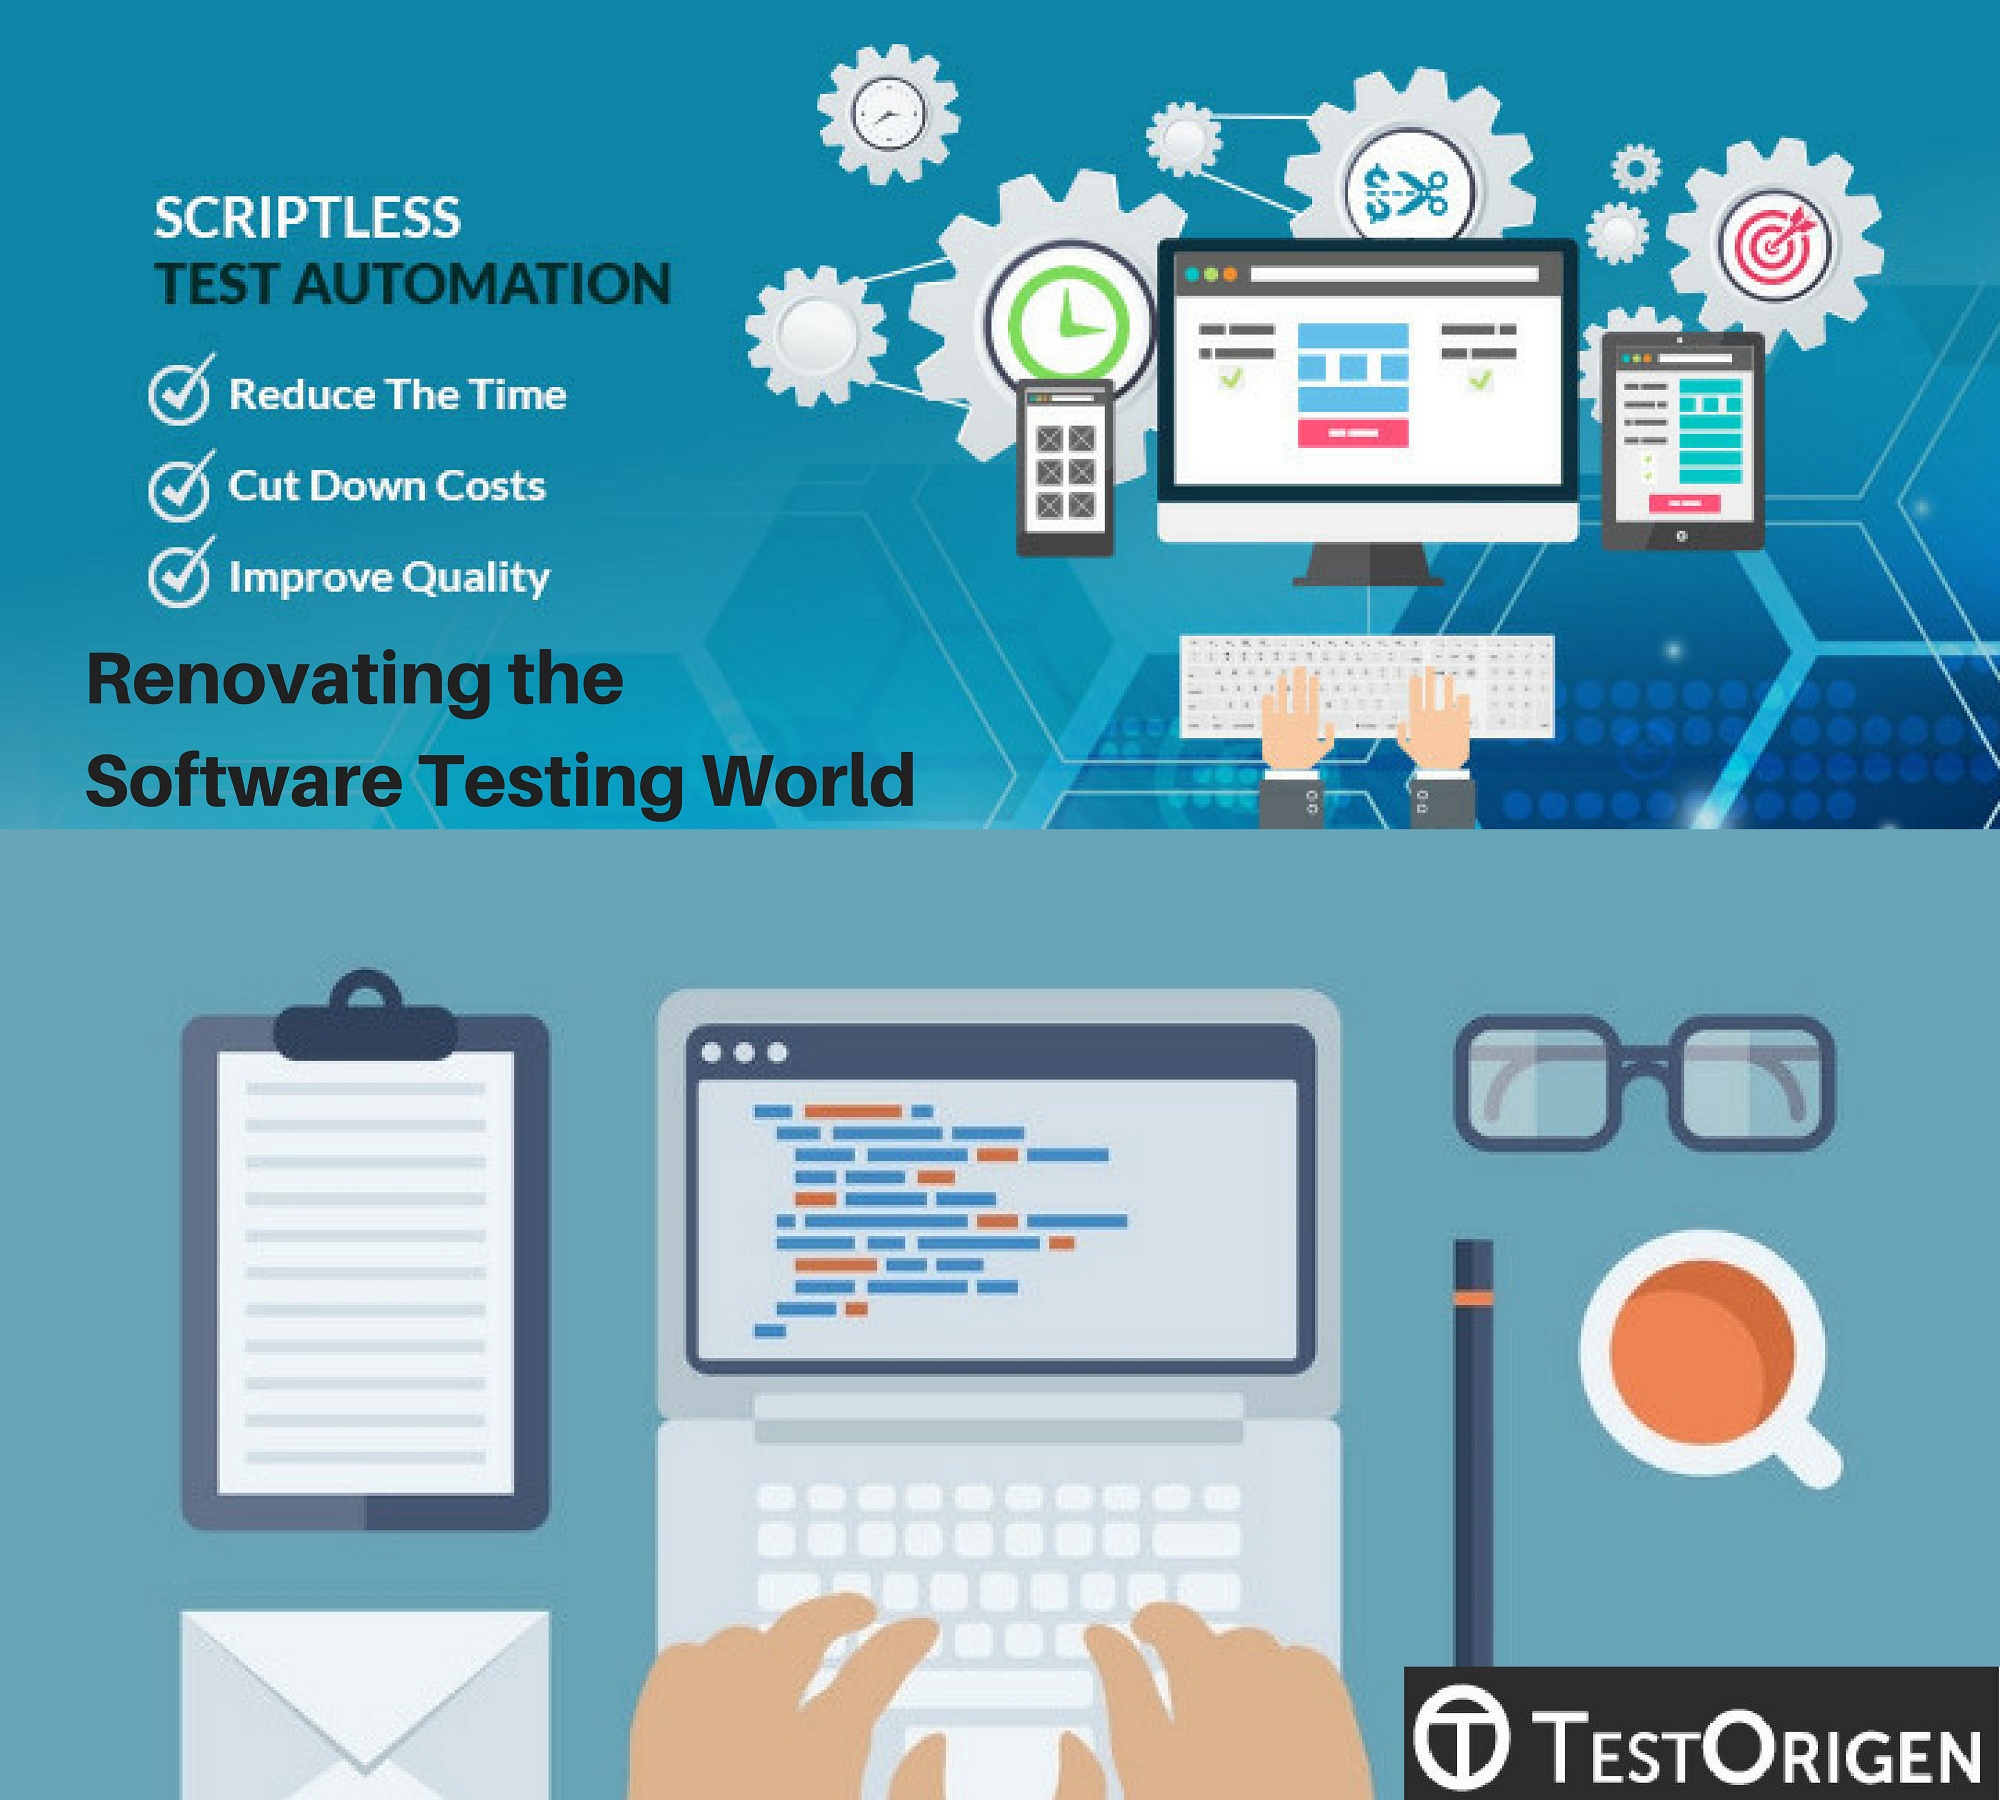 Scriptless Test Automation Renovating the Software Testing World